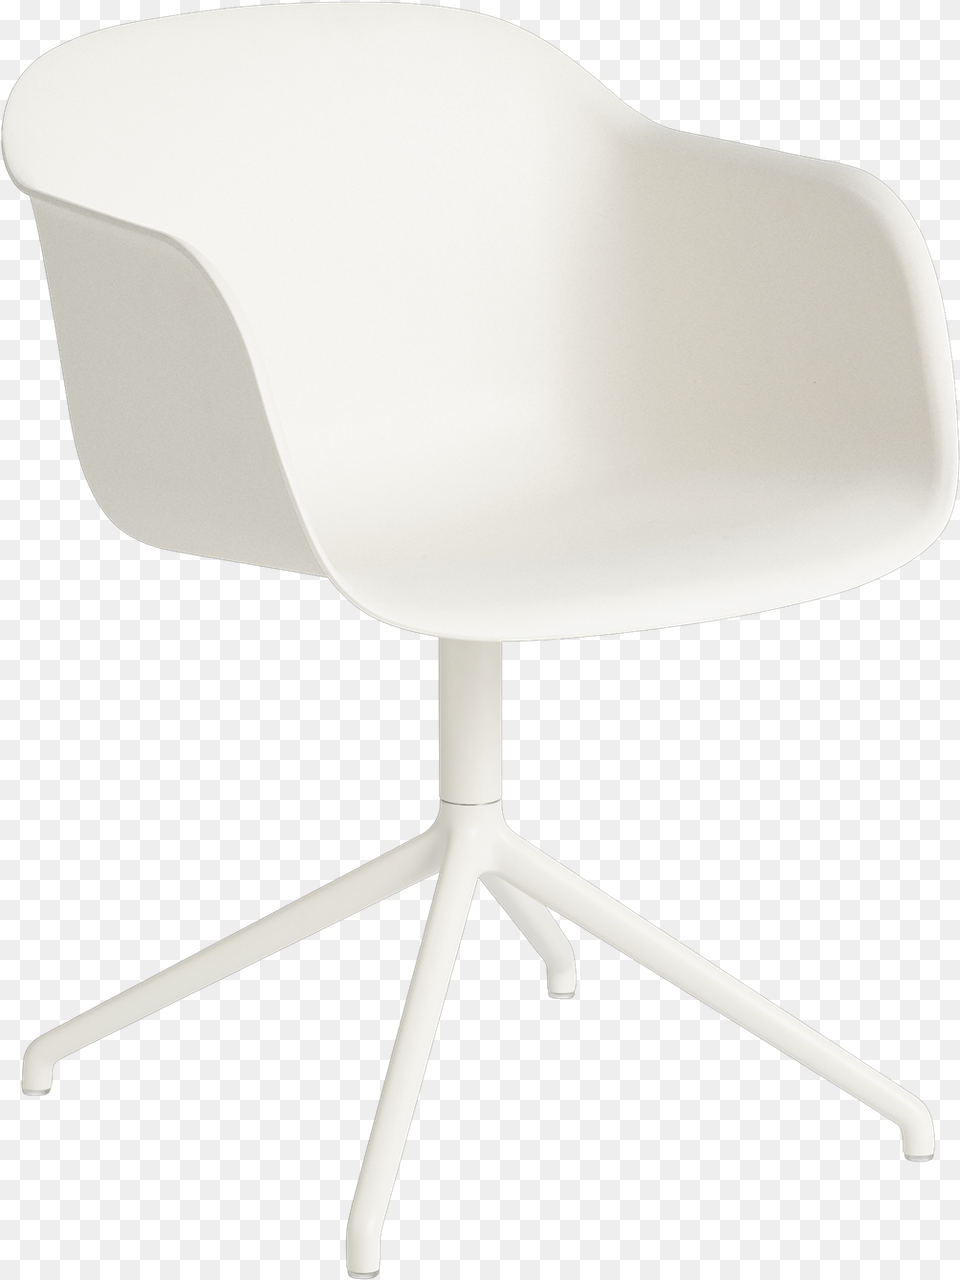 Fiber Armchair Swivel Whitewhite Office Chair, Furniture, Plywood, Wood Free Transparent Png